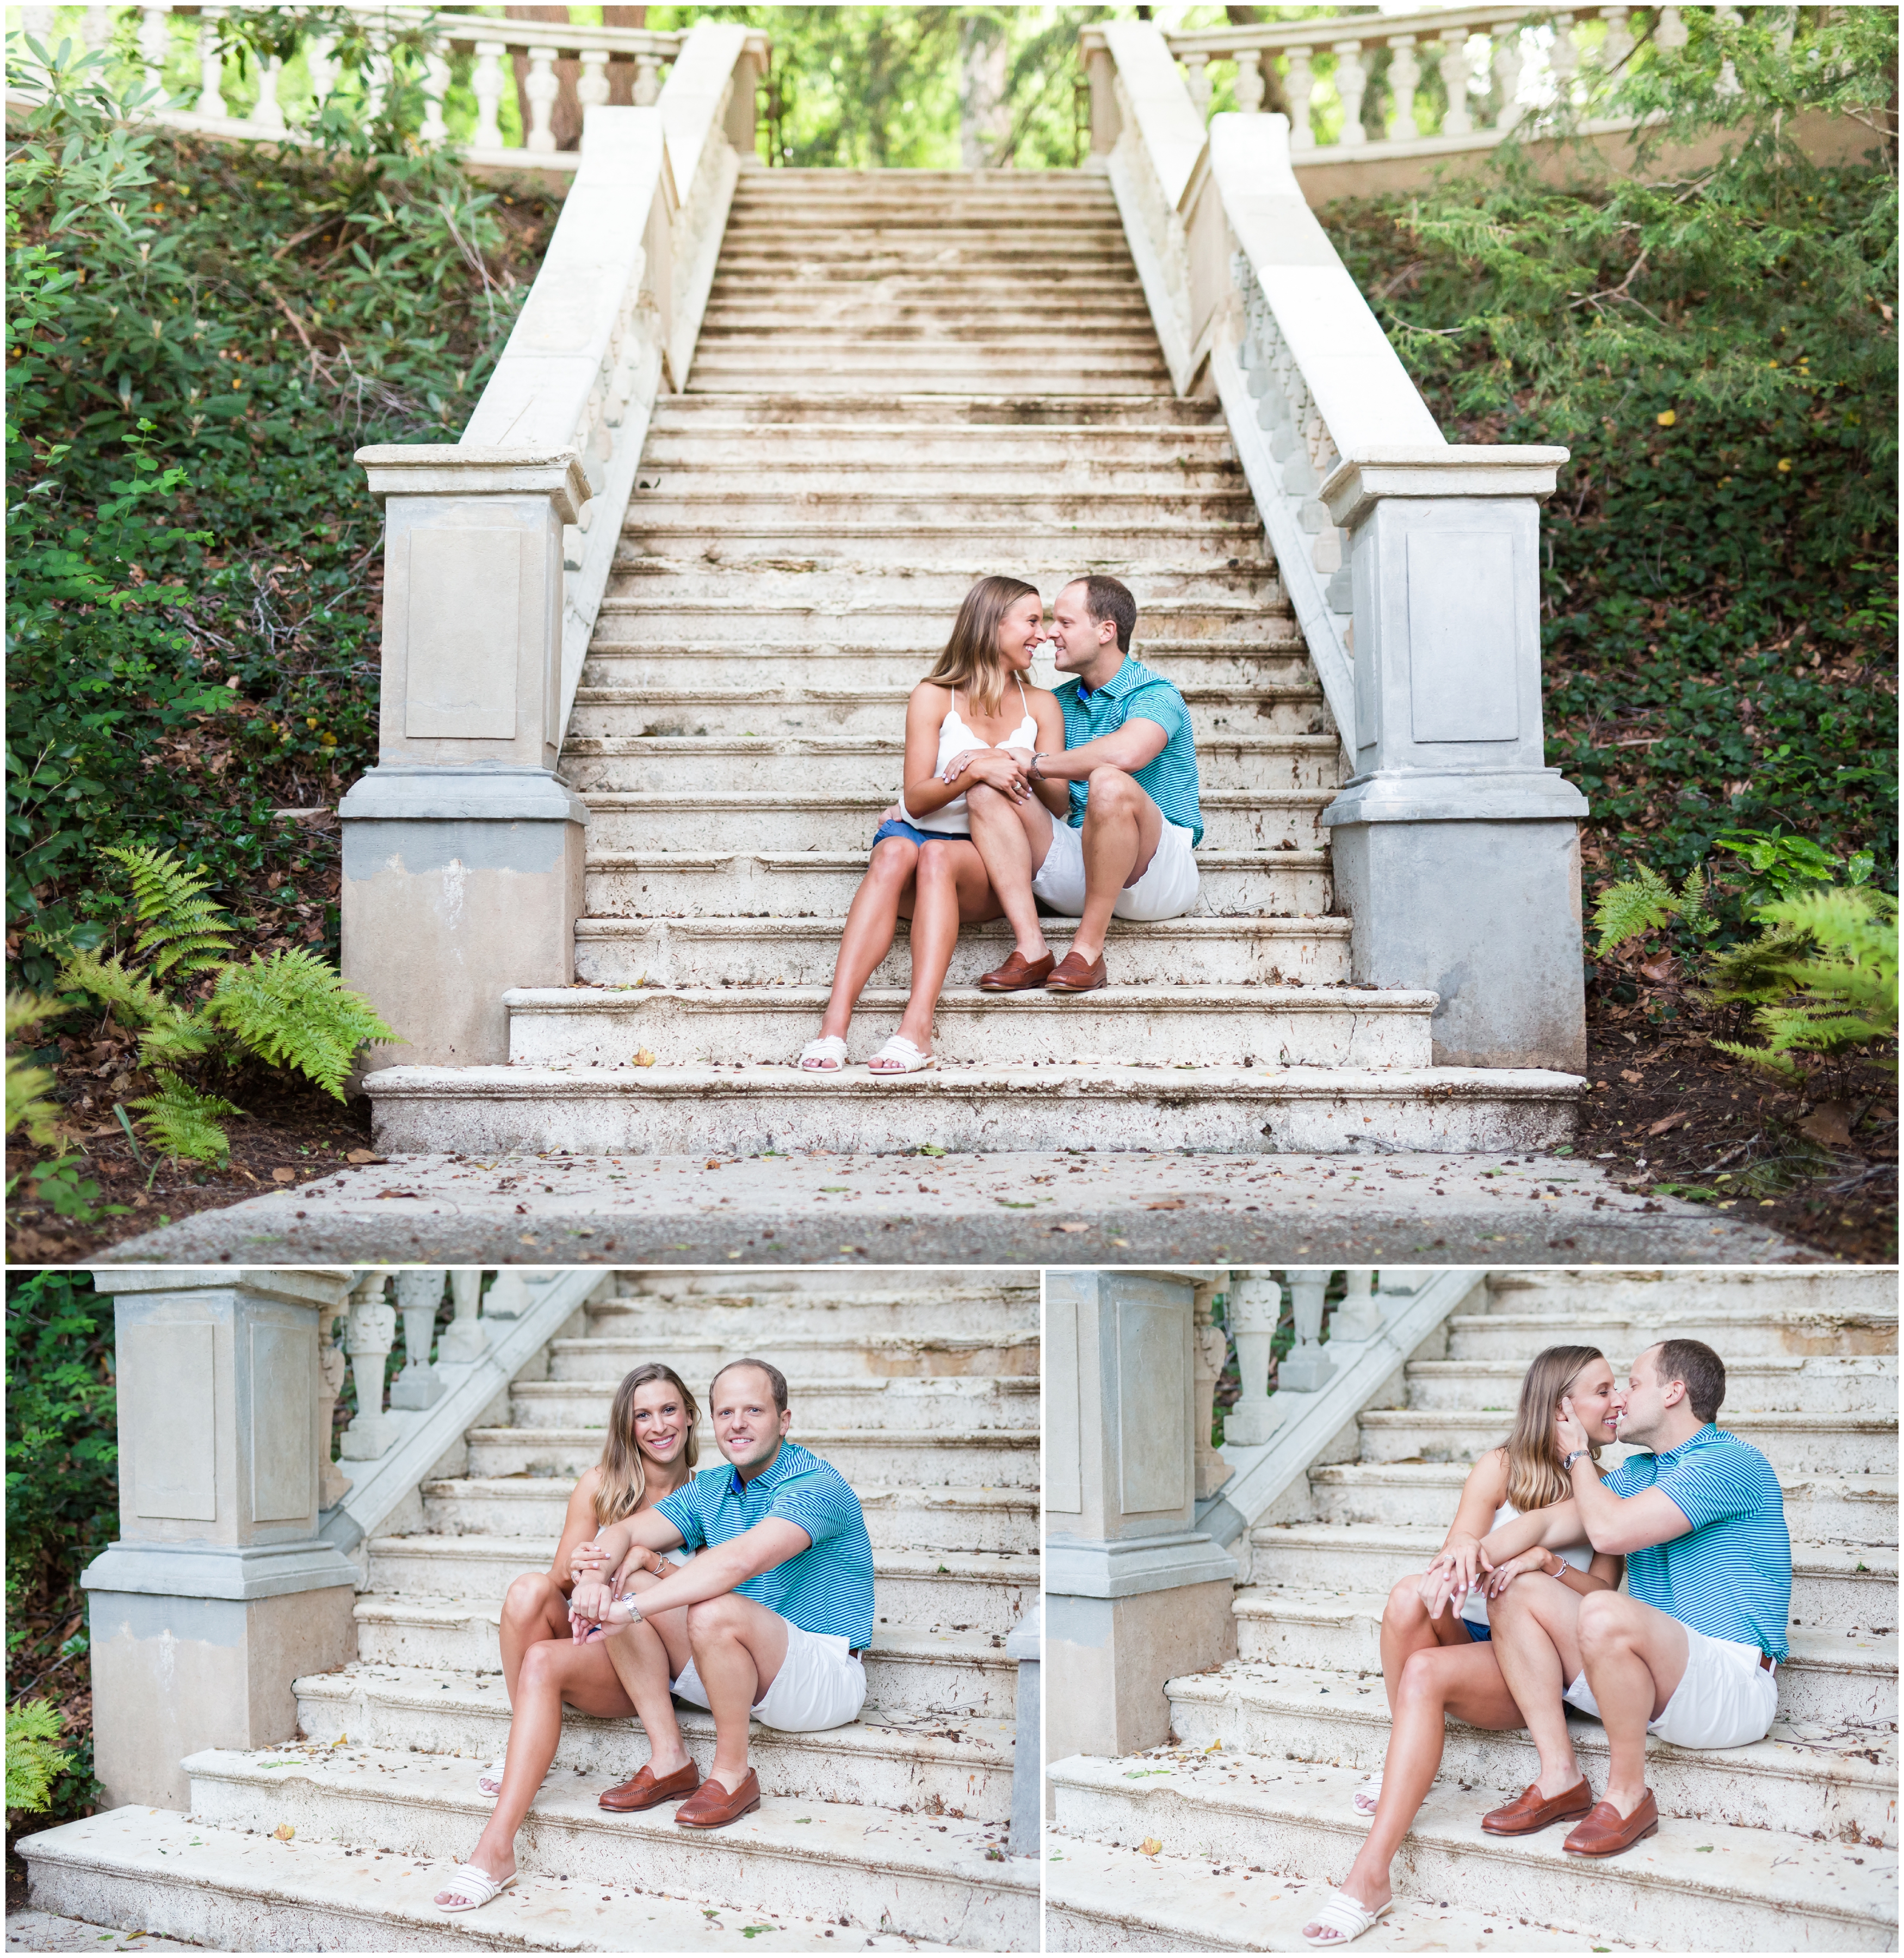 An engaged couple shares a kiss on the stairs at Cator Woolford Gardens